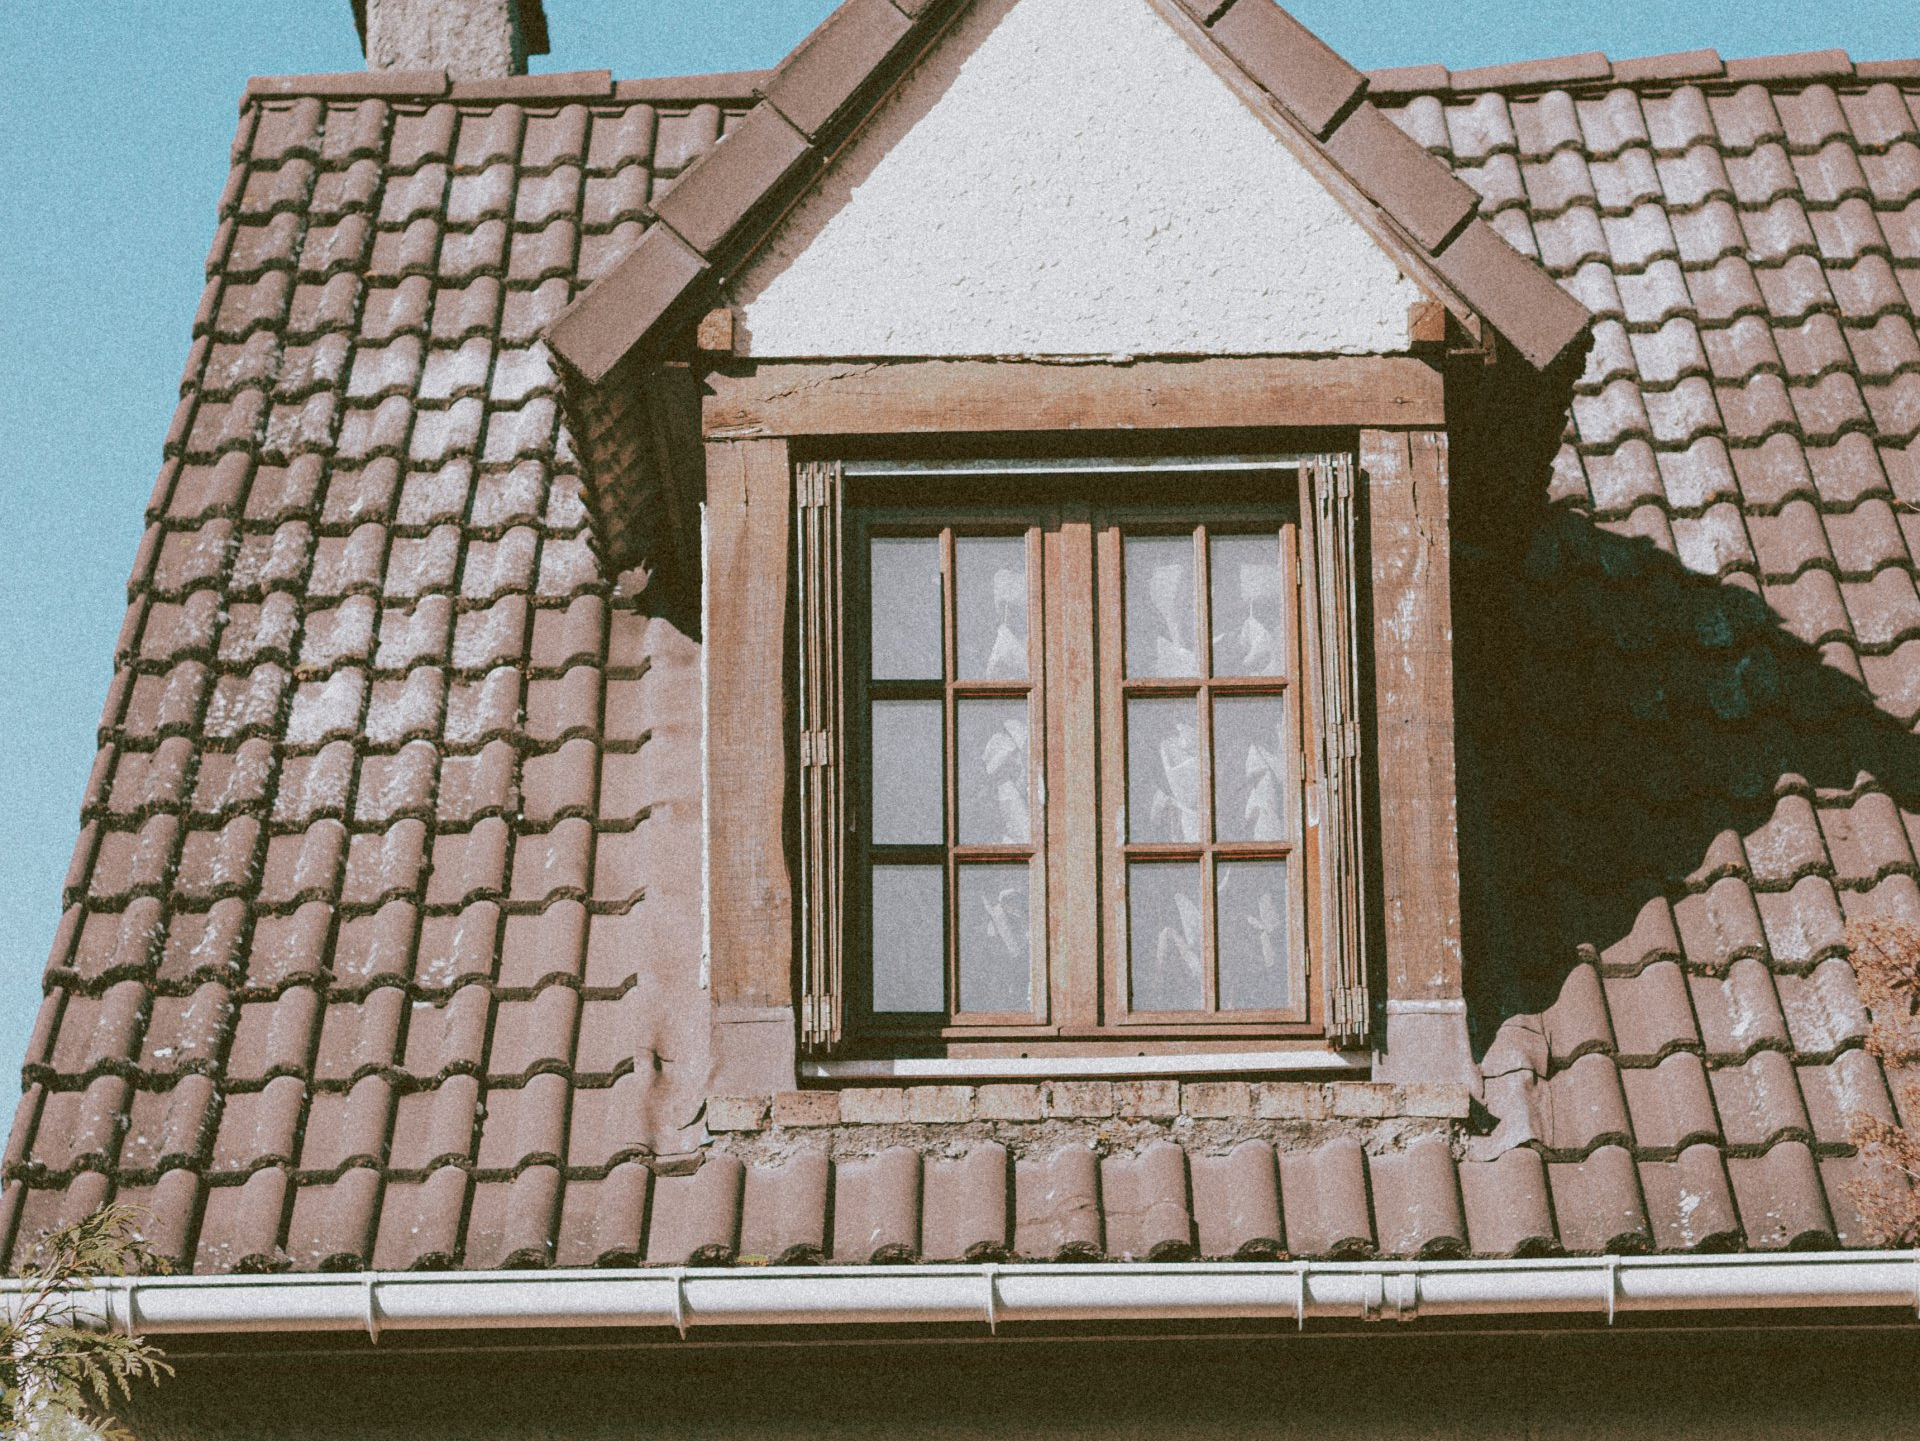 Roof tiles and window